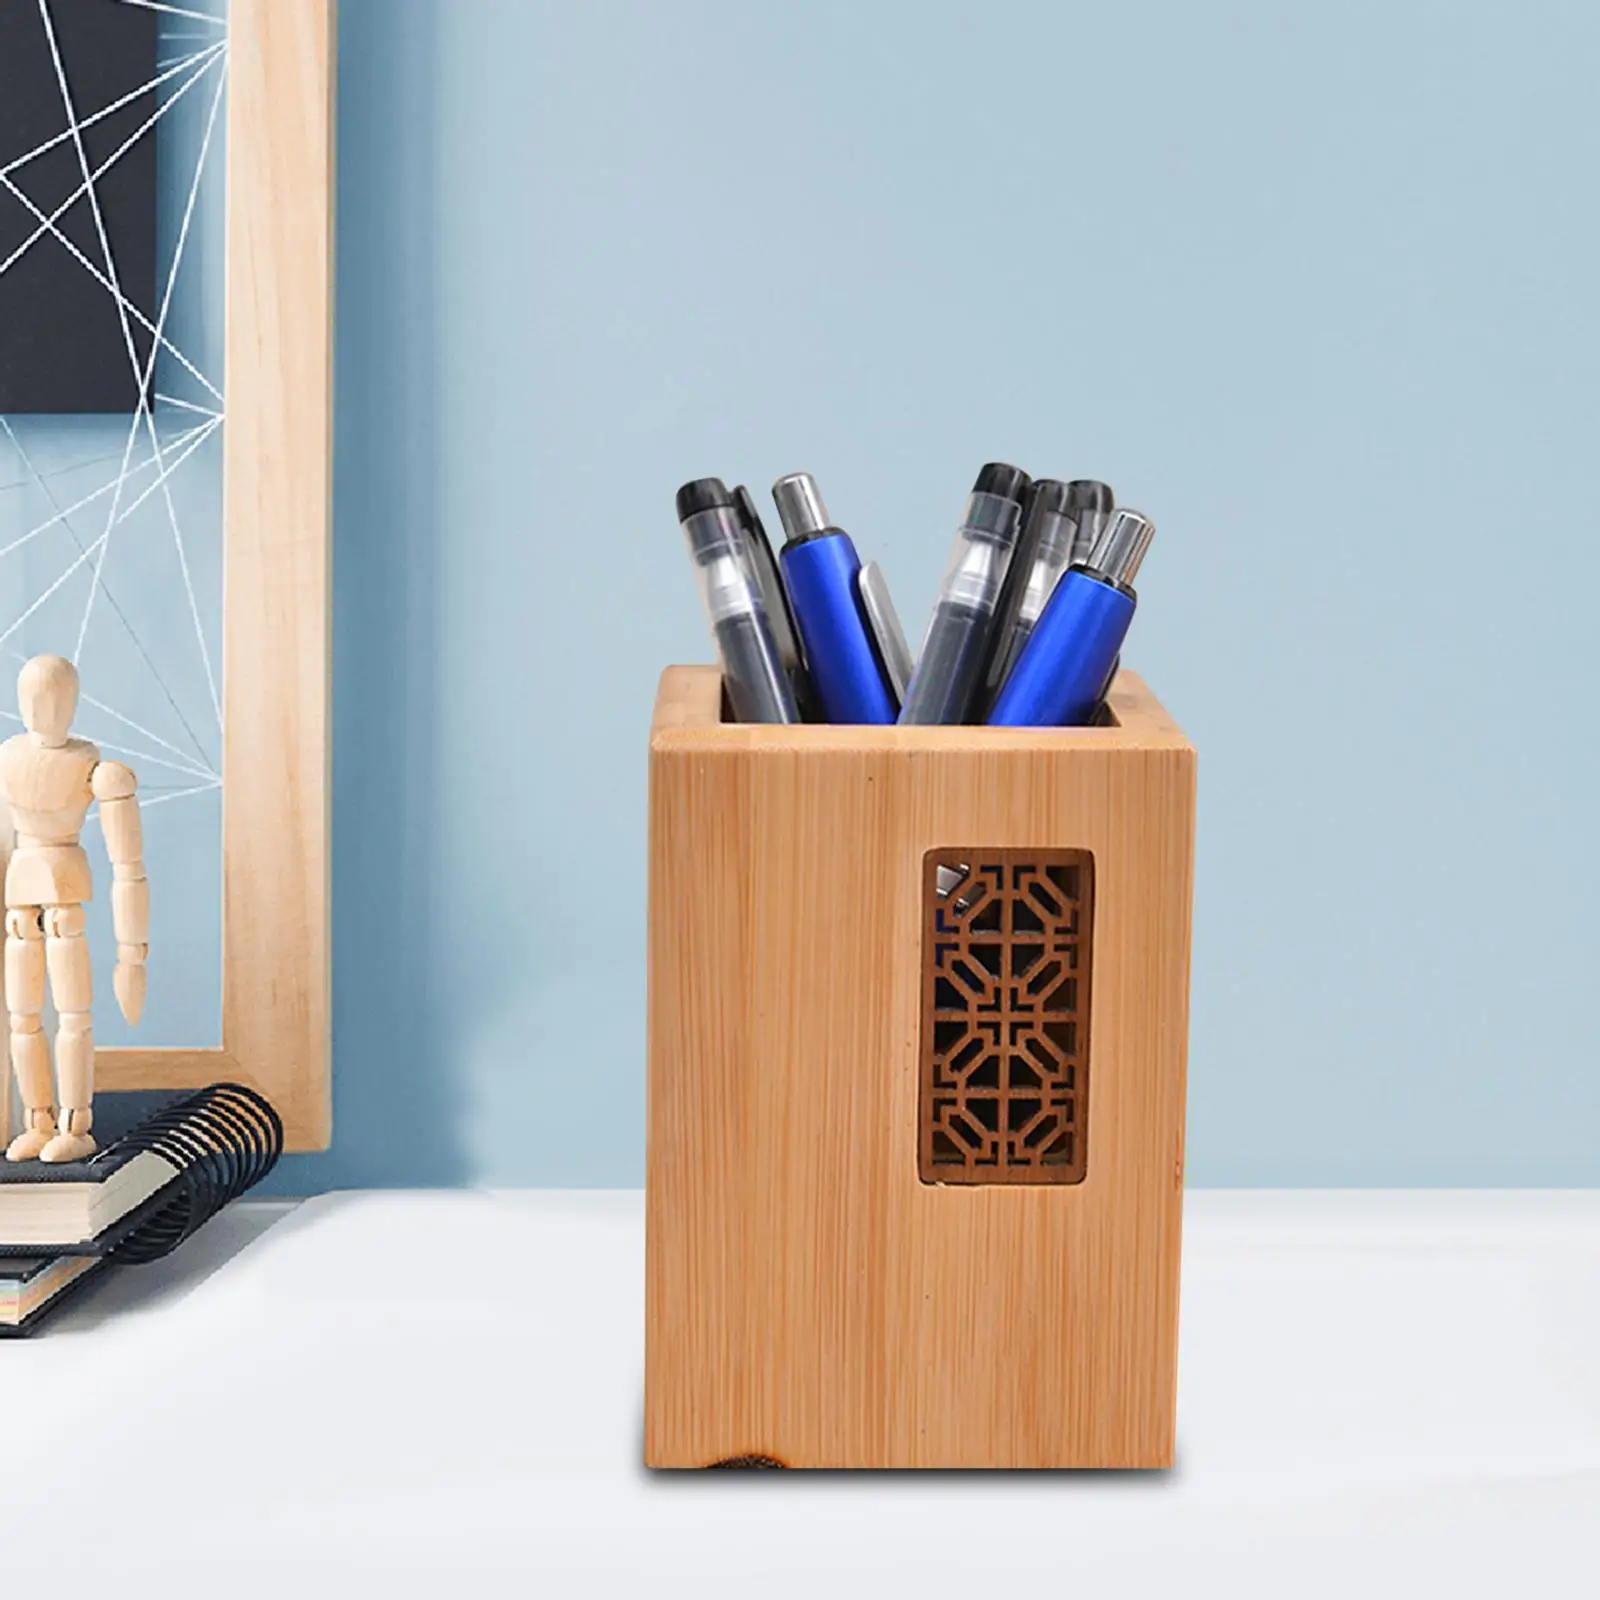 Pencil Holder Display Stand Table Fountain Pen Holder Desk Organizer Wooden Pen Holder for School Classroom Office Paint Brushes